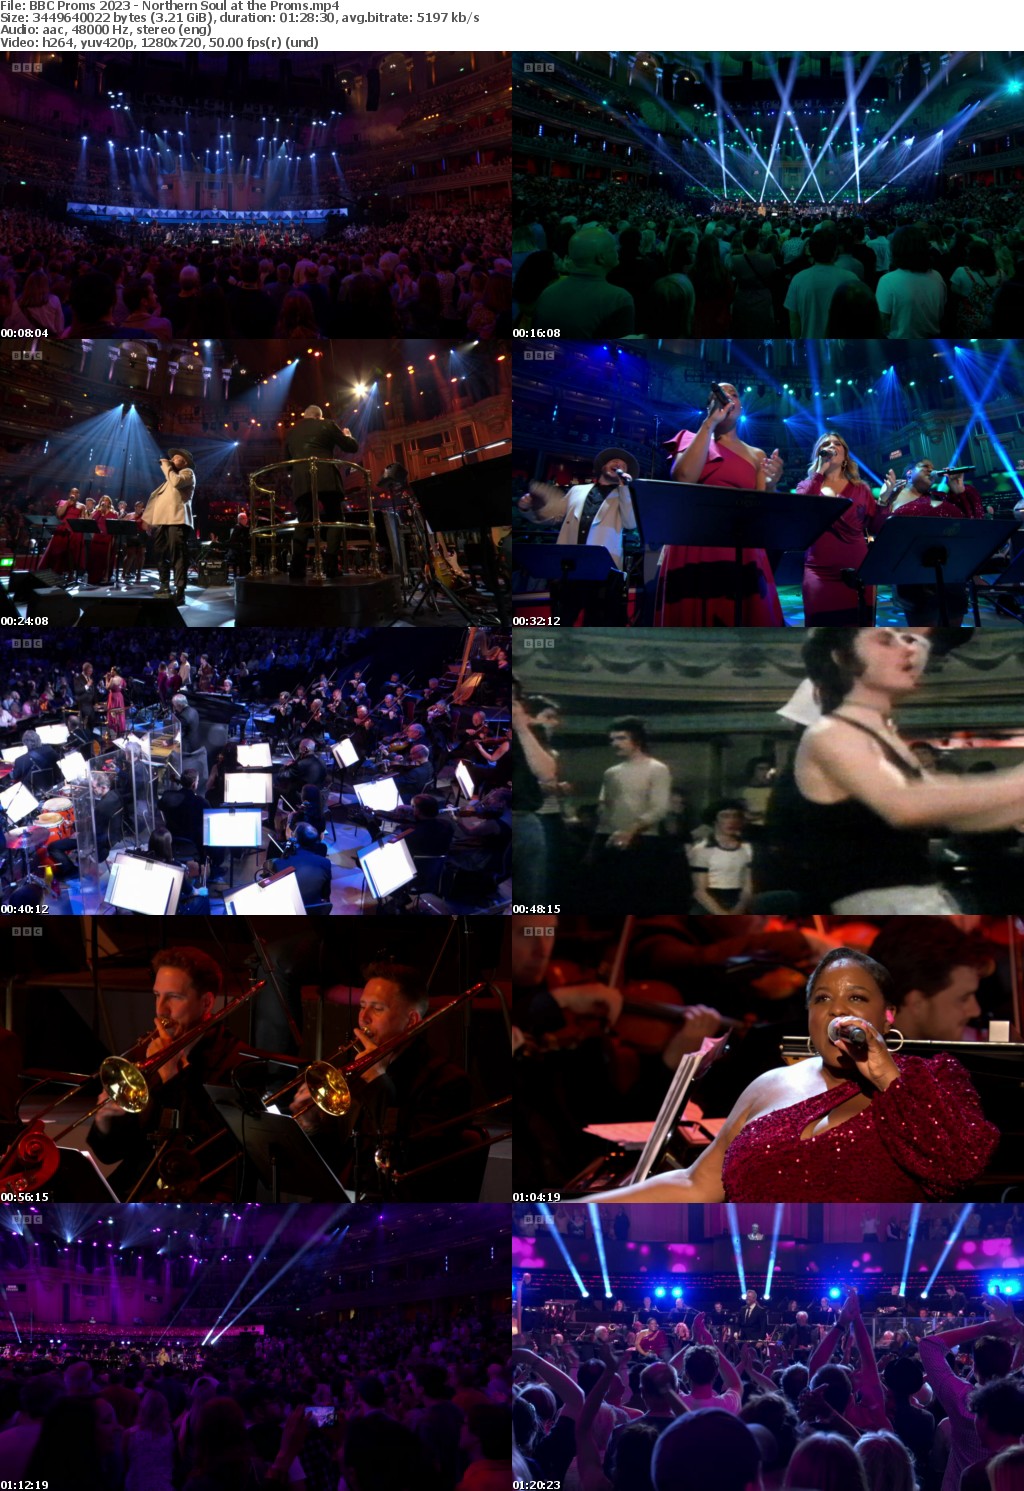 BBC Proms 2023 - Northern Soul at the Proms (1280x720p HD, 50fps, soft Eng subs)